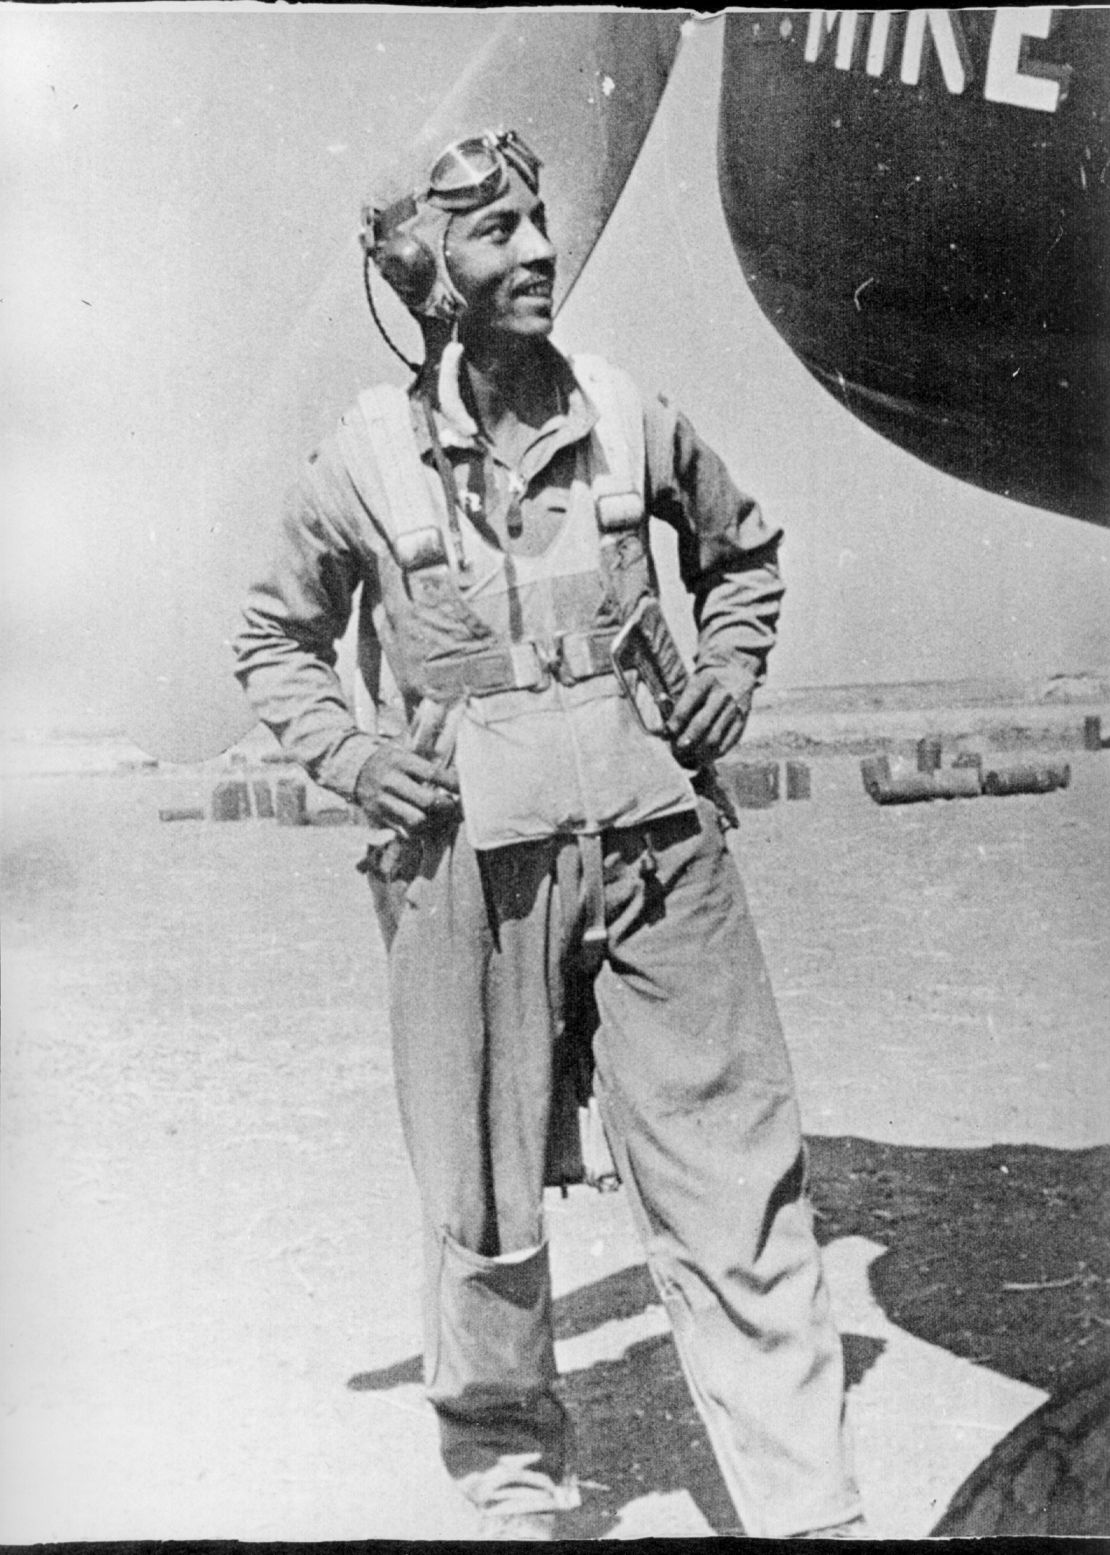 Herbert Carter deployed to war in 1943. He named his plane "Mike," the nickname he gave his wife, Mildred.